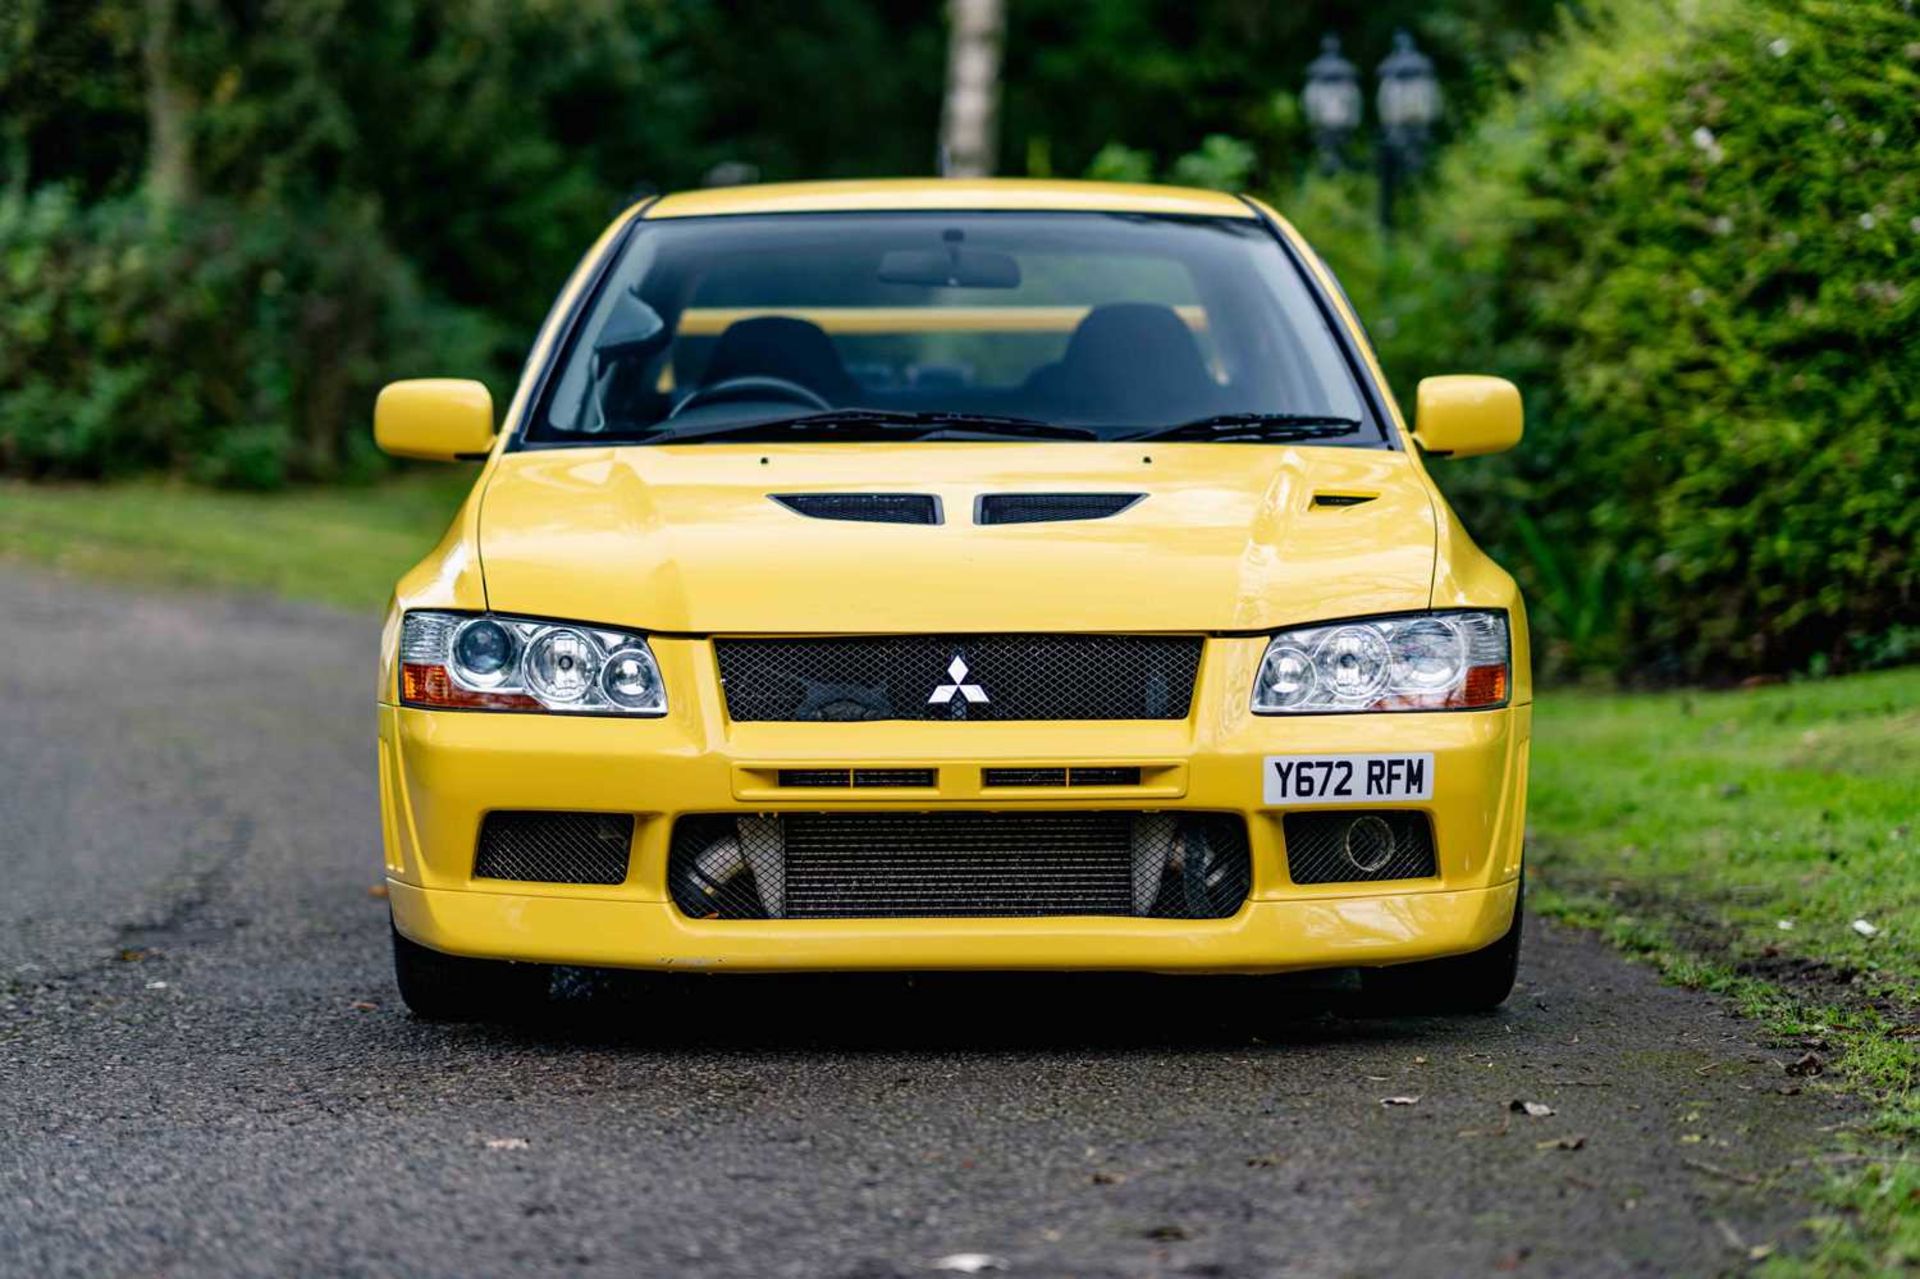 2001 Mitsubishi Lancer Evolution VII Subtly upgraded and previous long-term (seventeen year) ownersh - Image 3 of 64